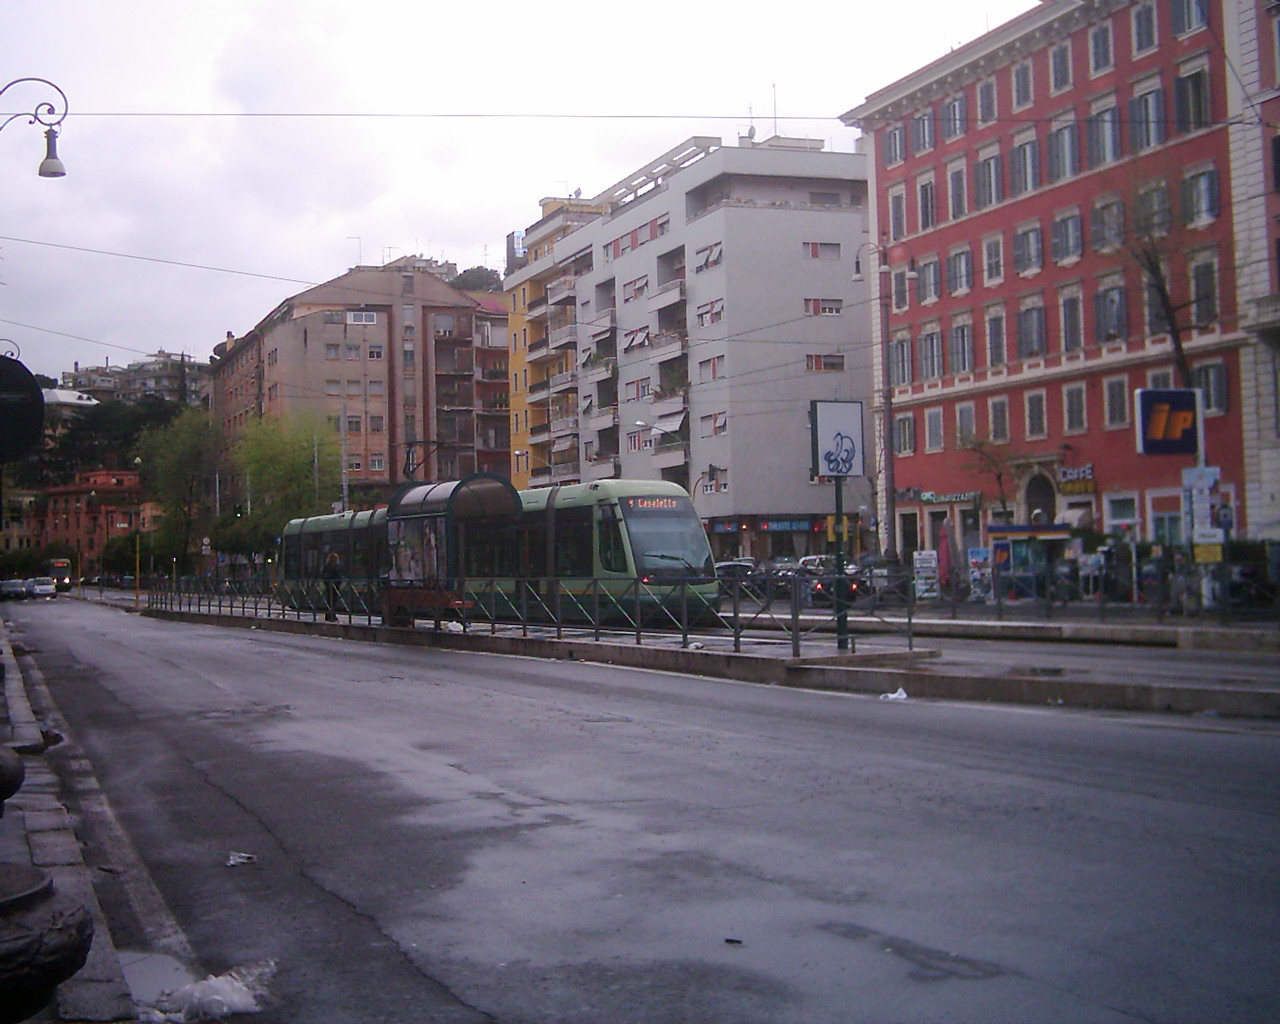 a bus on a street next to tall buildings